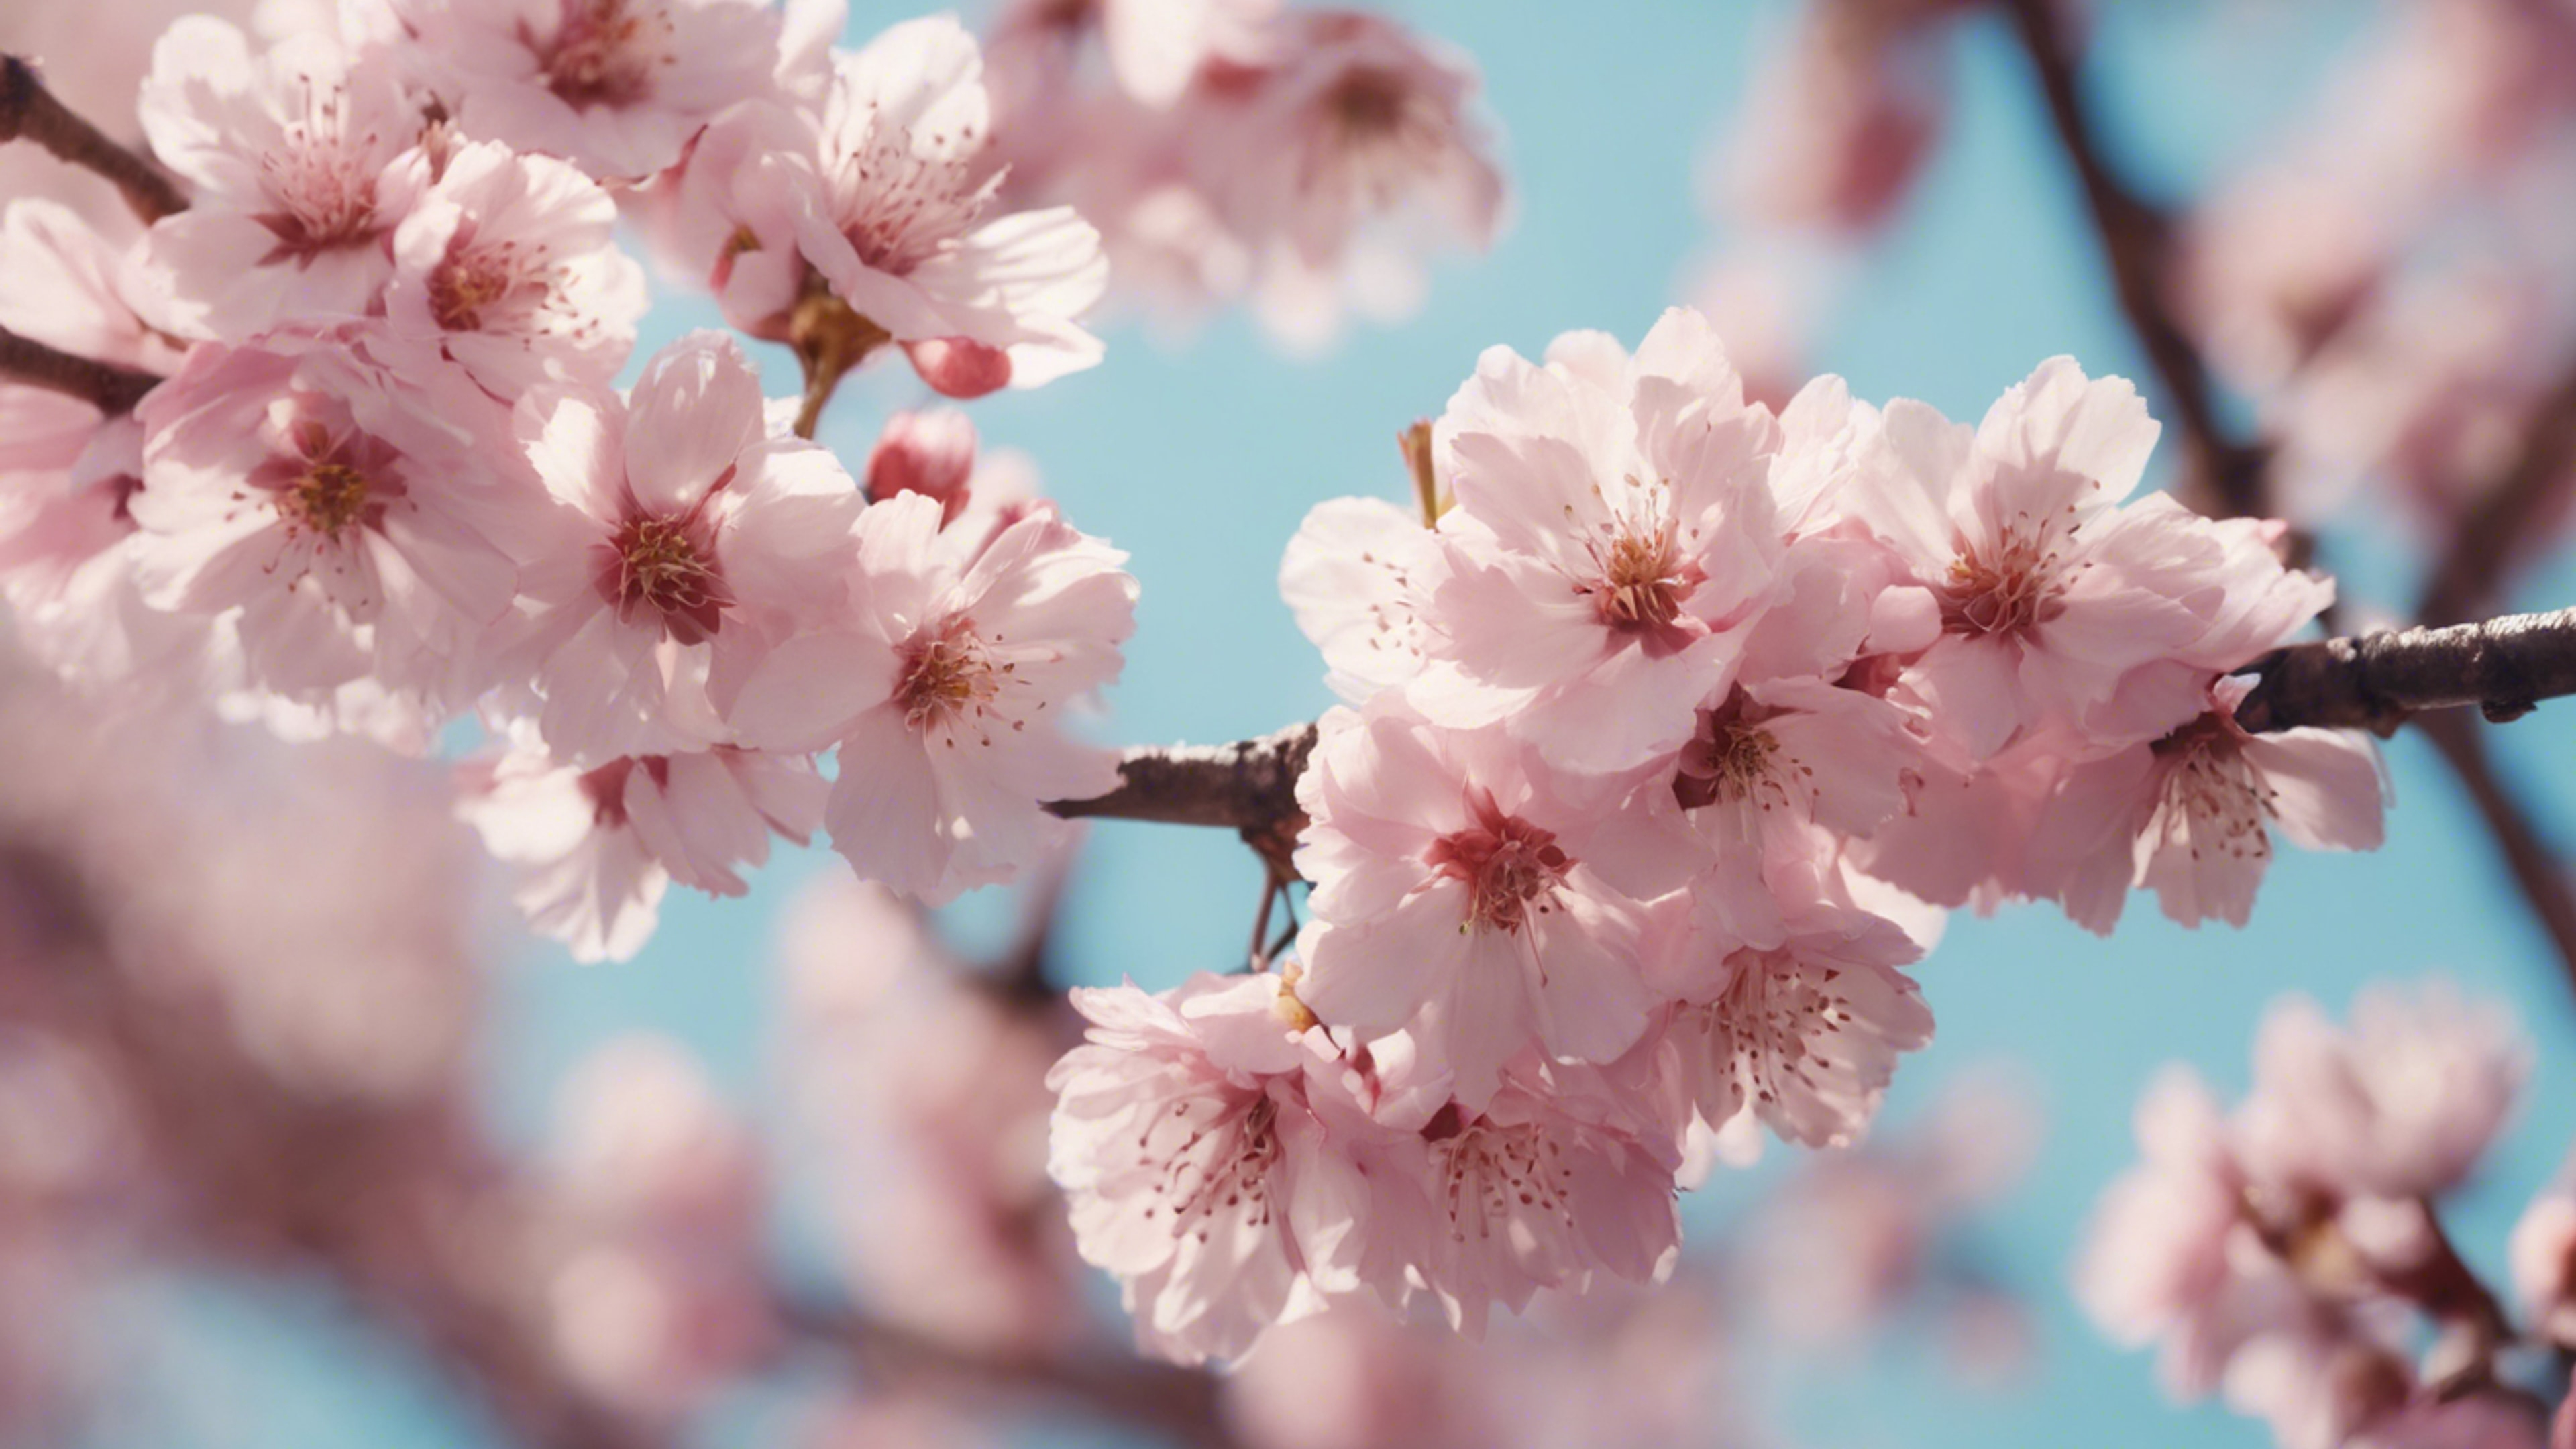 A vibrant scene of pastel pink cherry blossoms falling gently. Tapeta[c8bce7433f184c22a8f5]